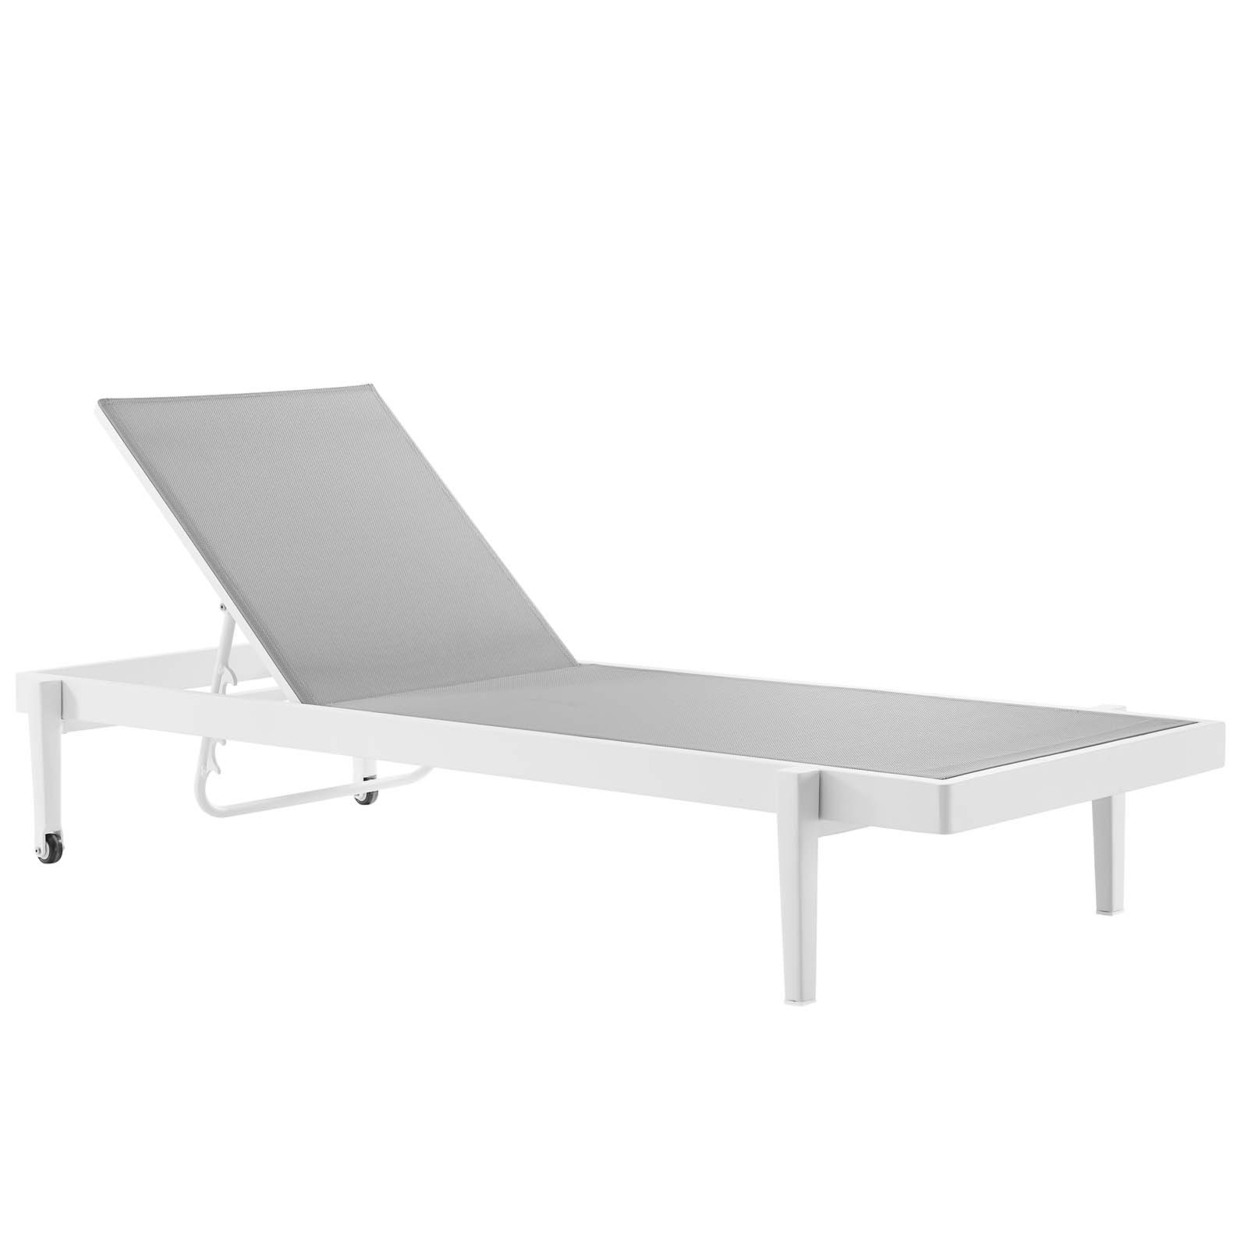 Modway Charleston Metal Aluminum Patio Chaise Lounge Chair in White/Gray - image 1 of 7